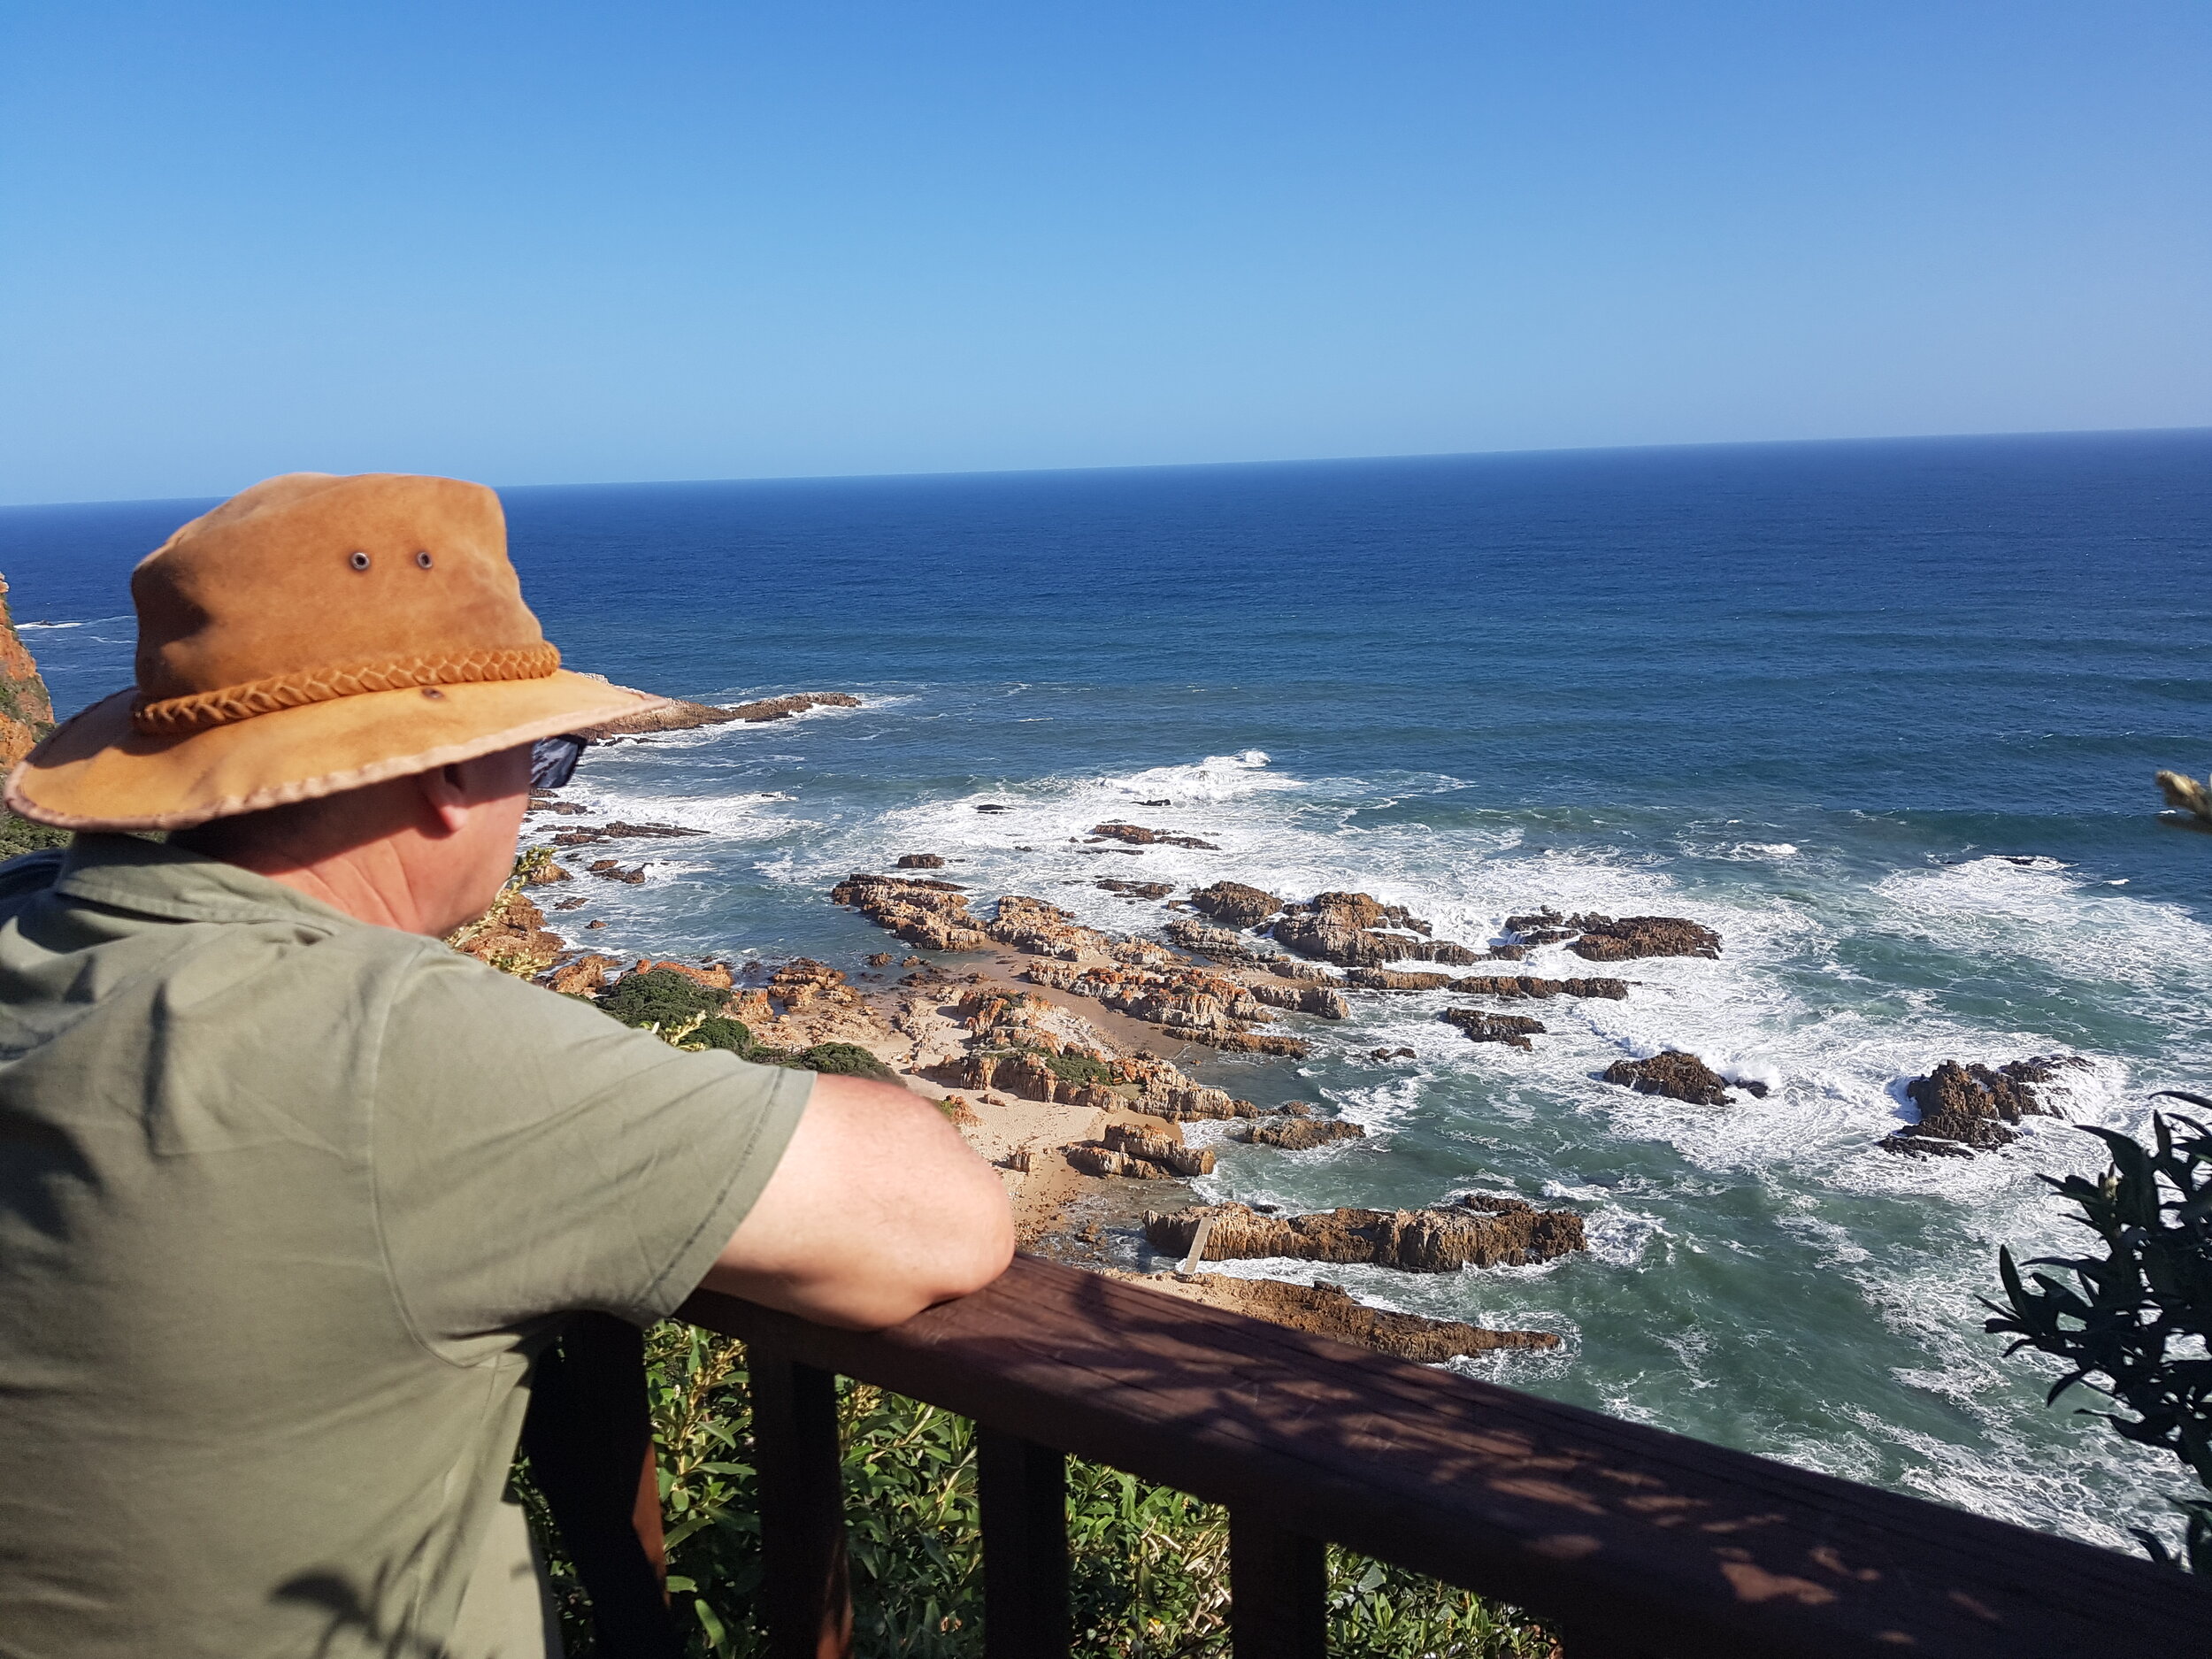 Ocean view at the Heads of Knysna, South Africa